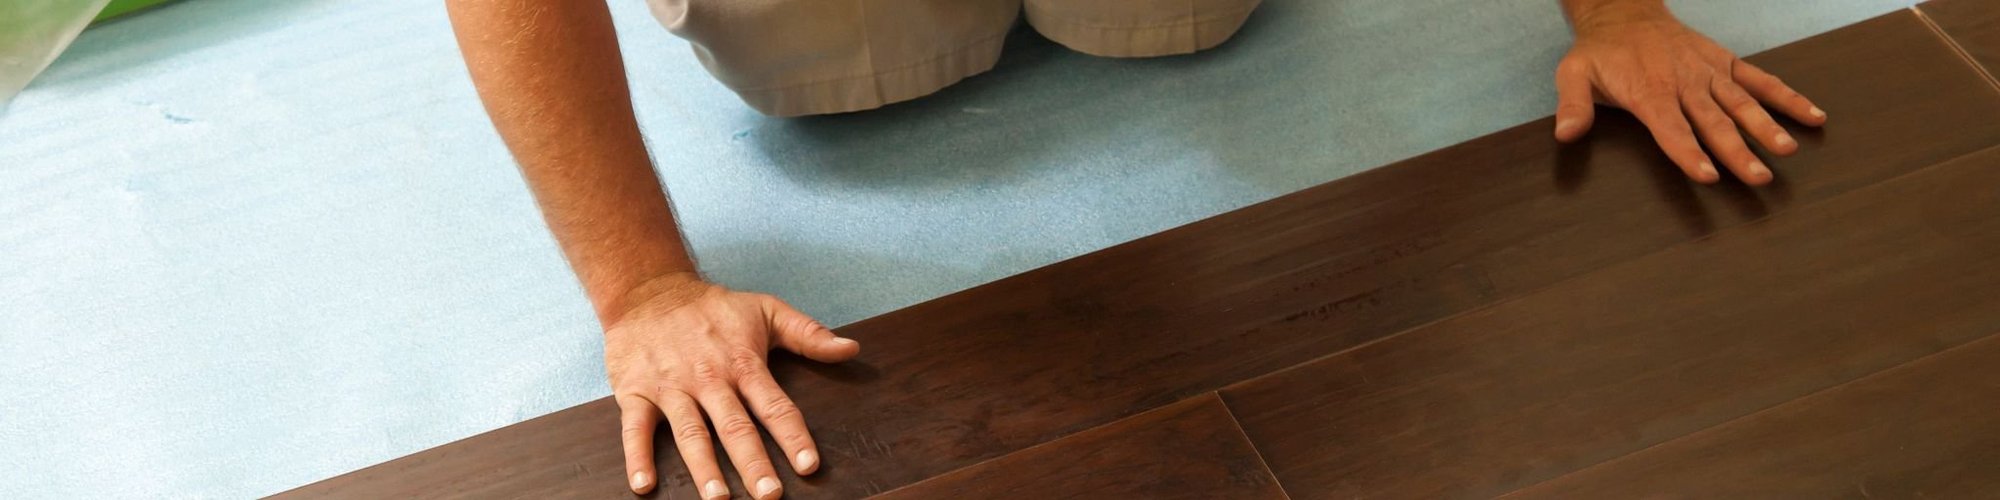 person installing flooring products from Kenny's Custom Flooring Inc. in San Marcos, CA